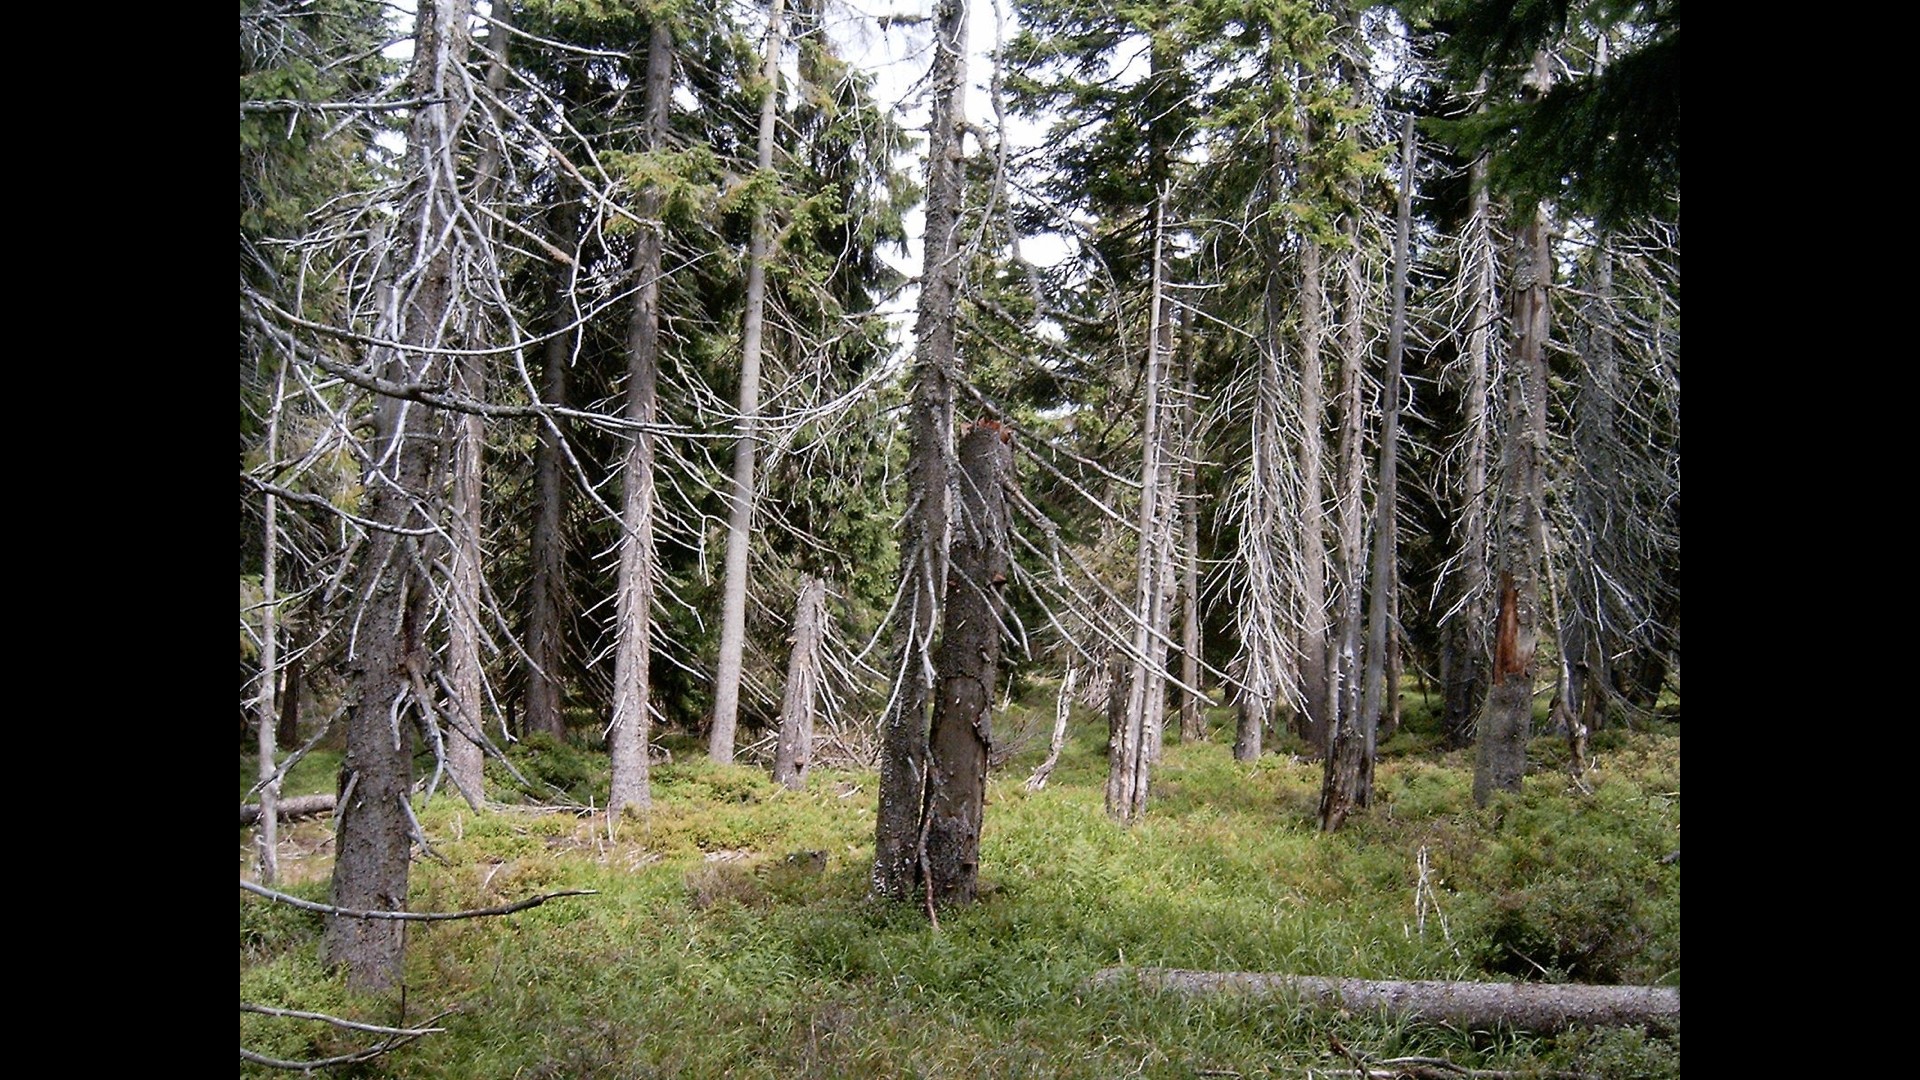 A forest filled with dead looking trees.